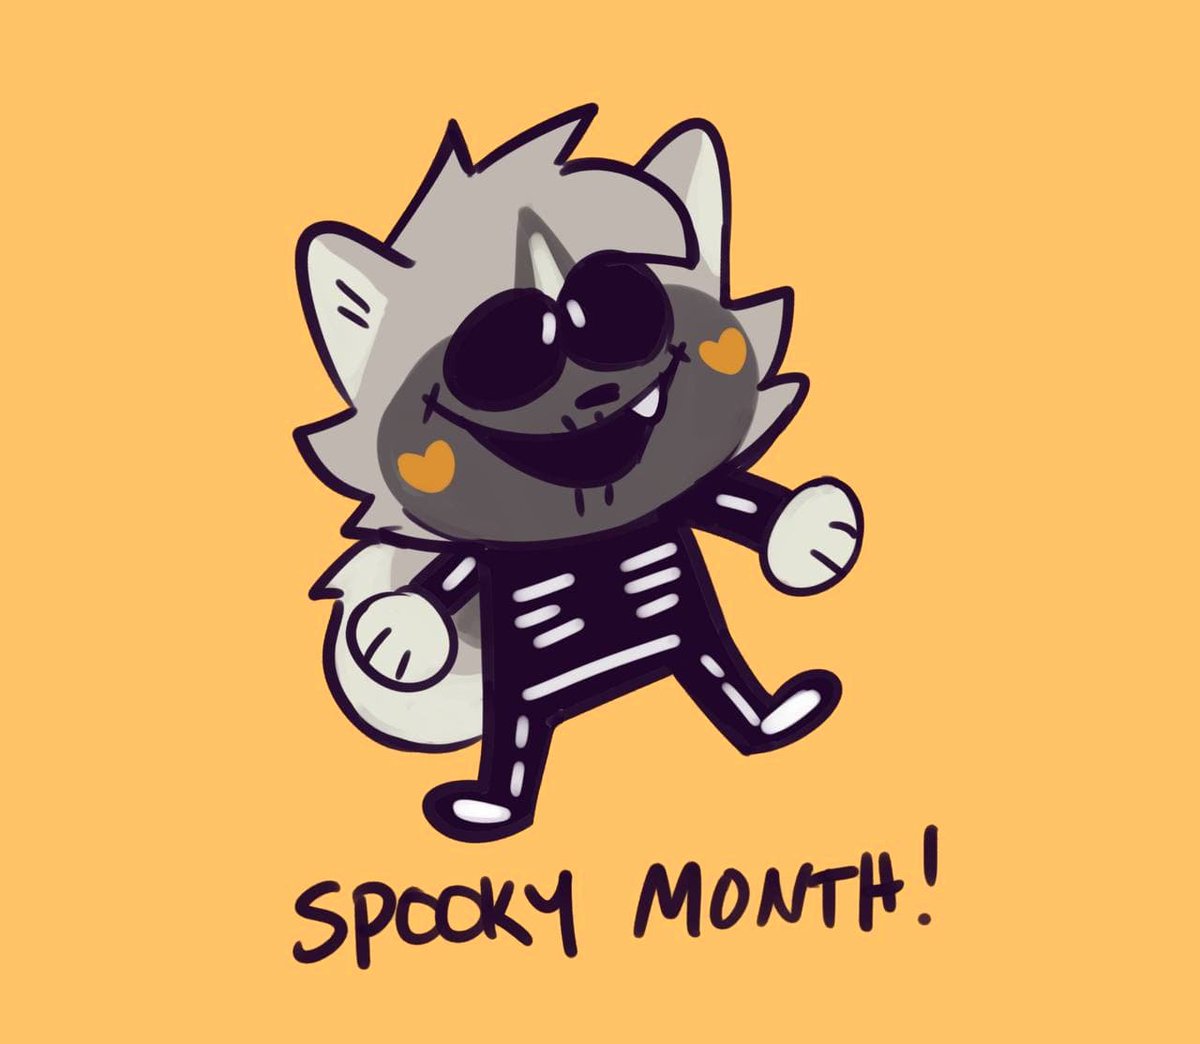 Spooky month? Spooky month!